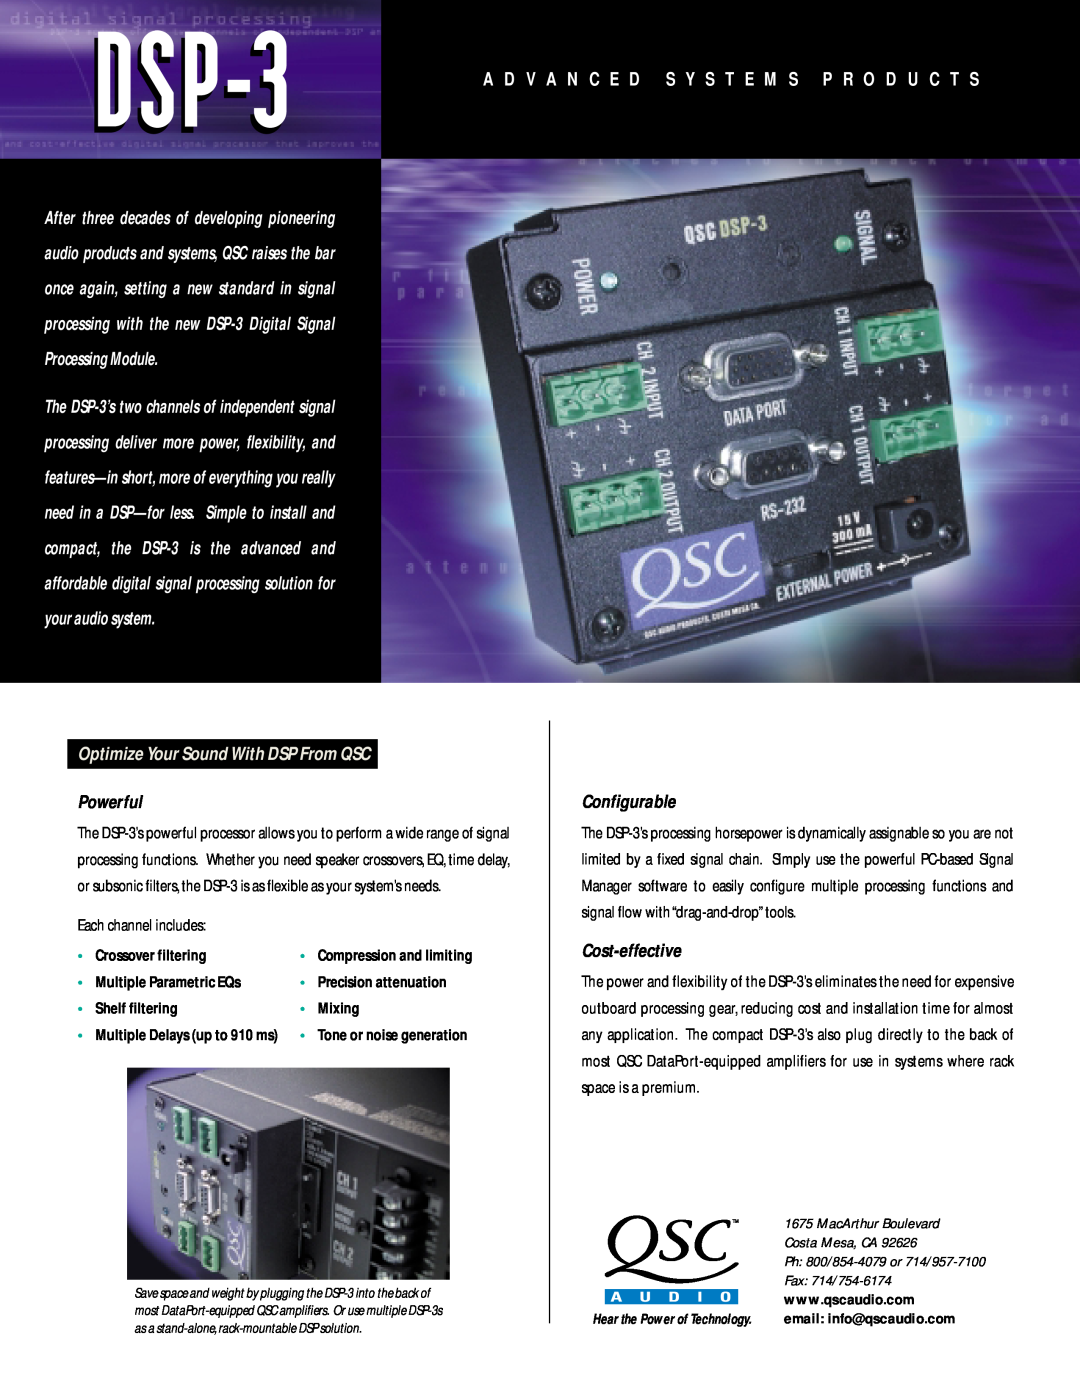 QSC Audio DSP-3 manual A D V A N C E D S Y S T E M S P R O D U C T S, Optimize Your Sound With DSP From QSC, Powerful 